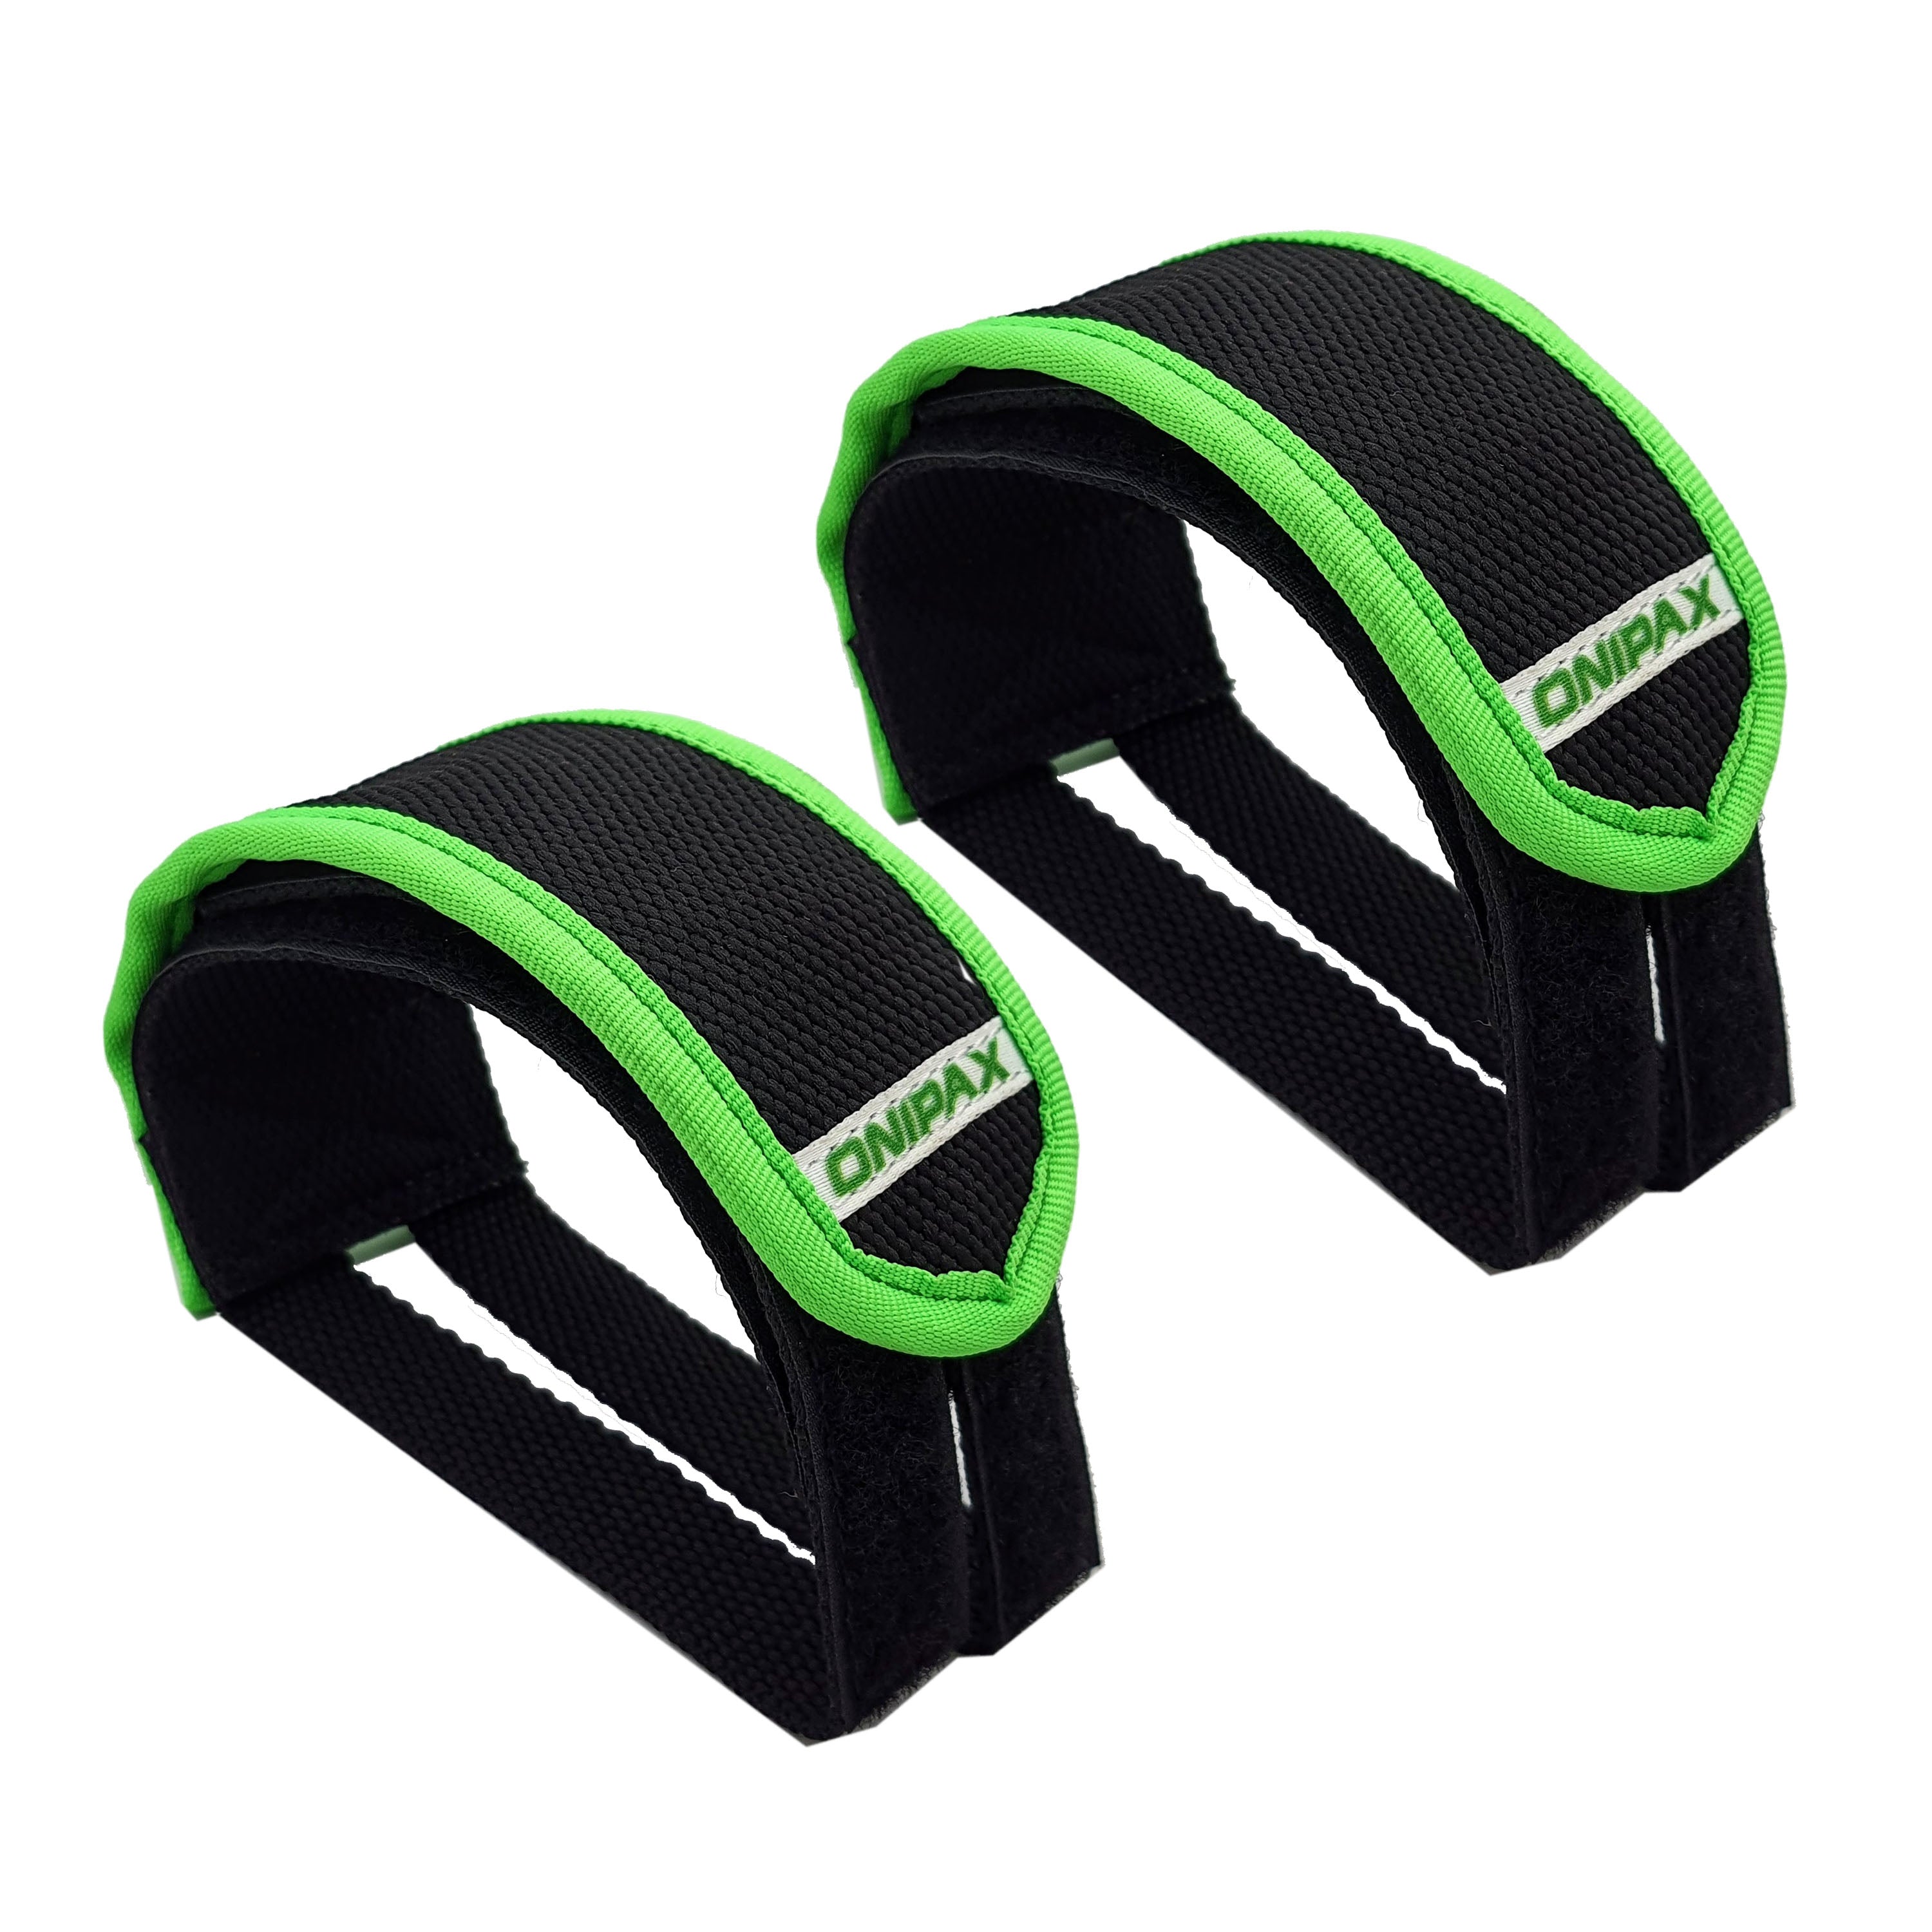 Multifunction Bike Pedal Band Bike Pedal Strap Toe Straps for Gym Cycling